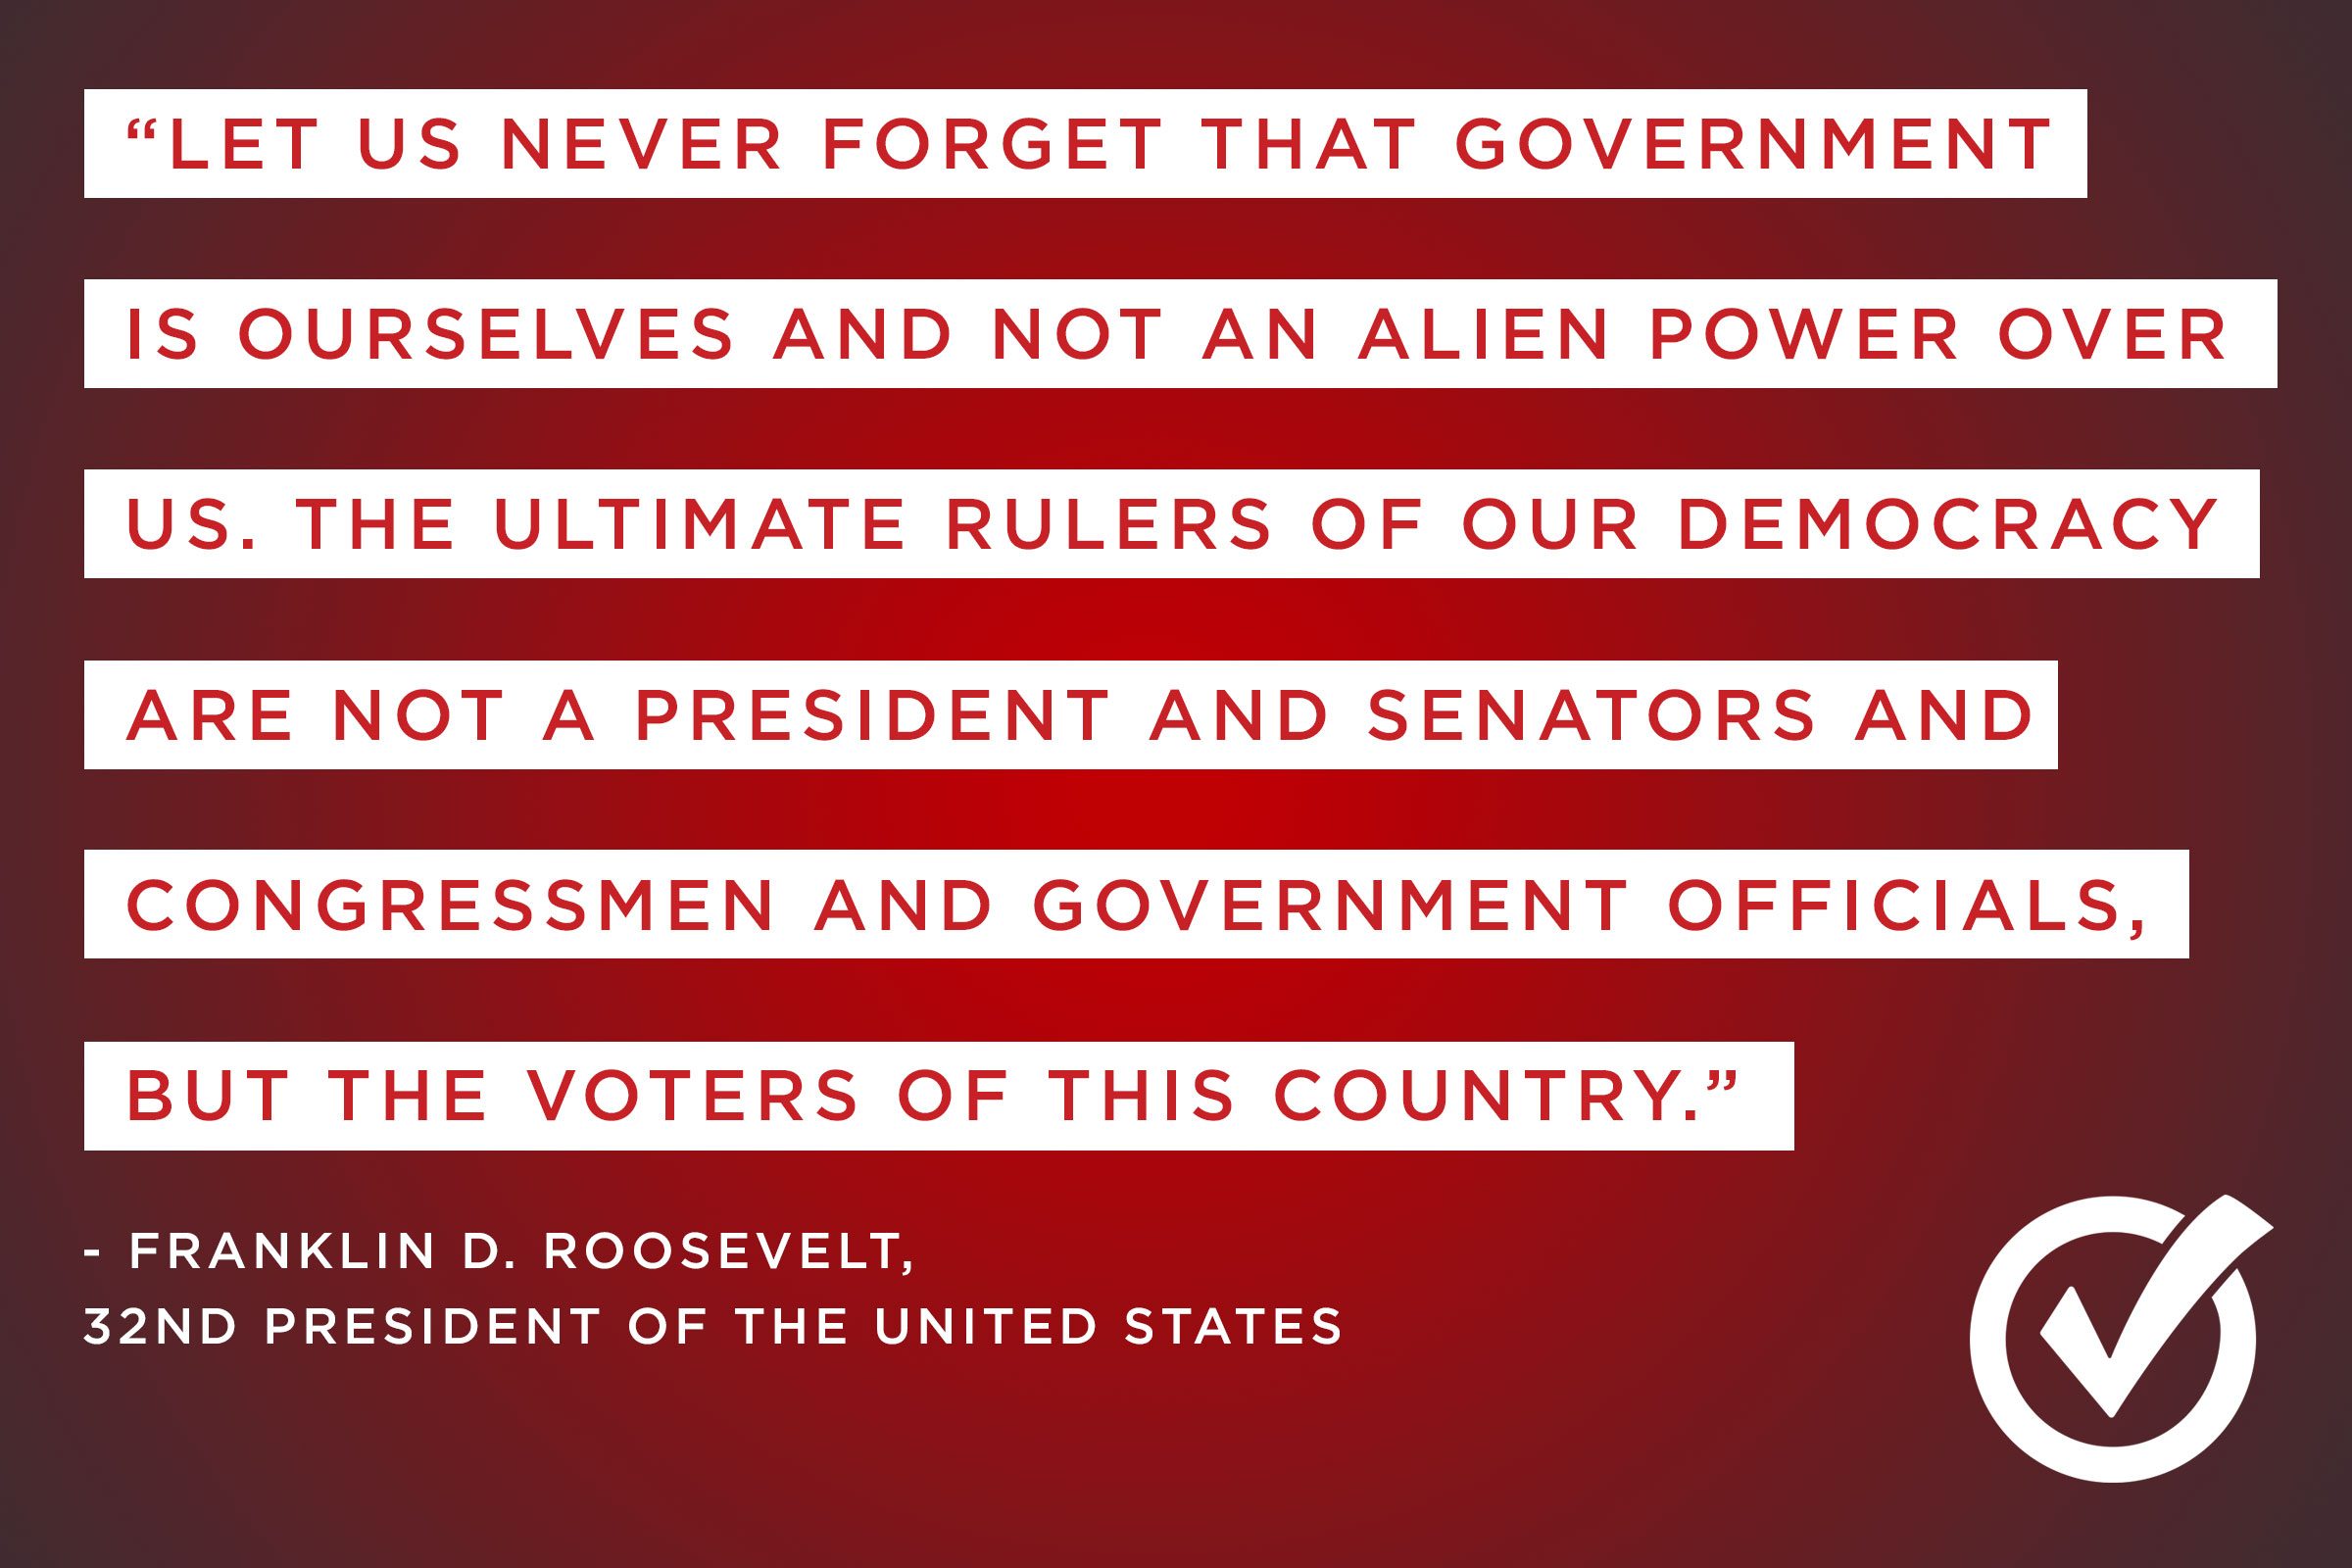 Franklin D Roosevelt on the power of a vote